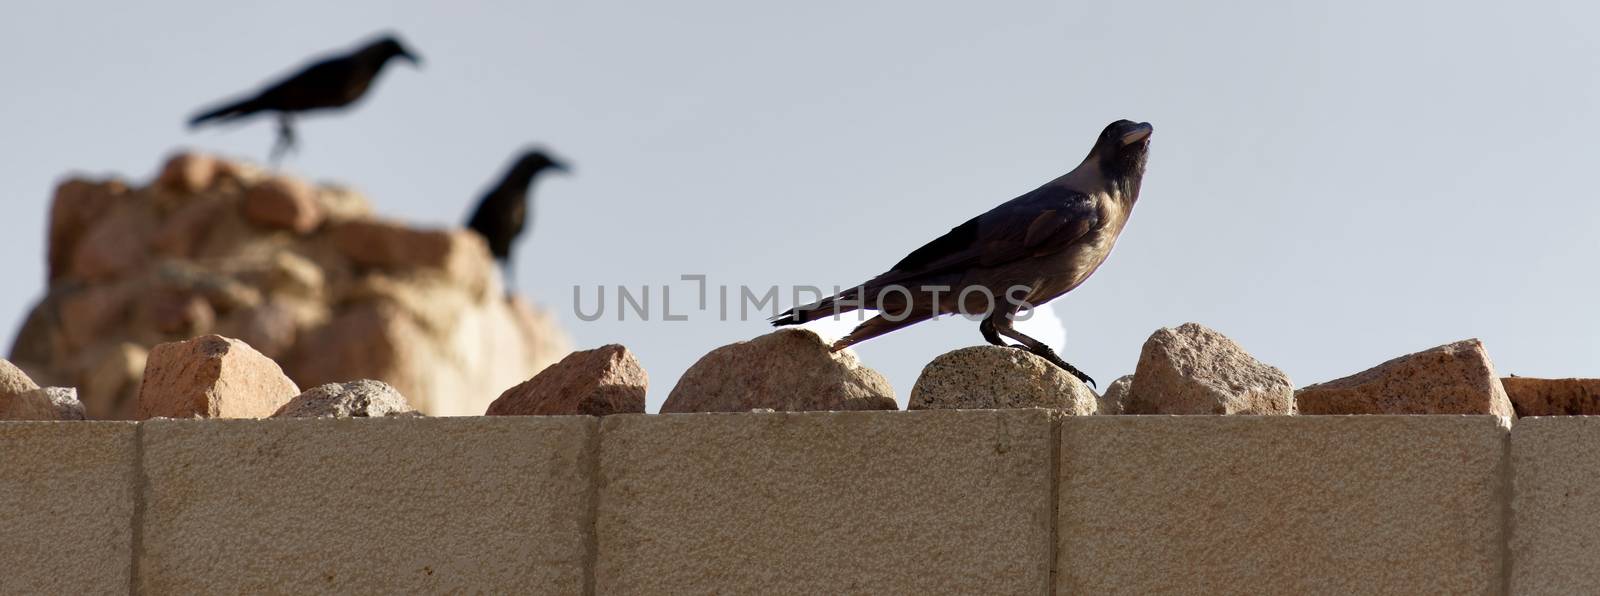 Black ravens and crows on the wall of the fortress of Aqaba, Jordan by geogif